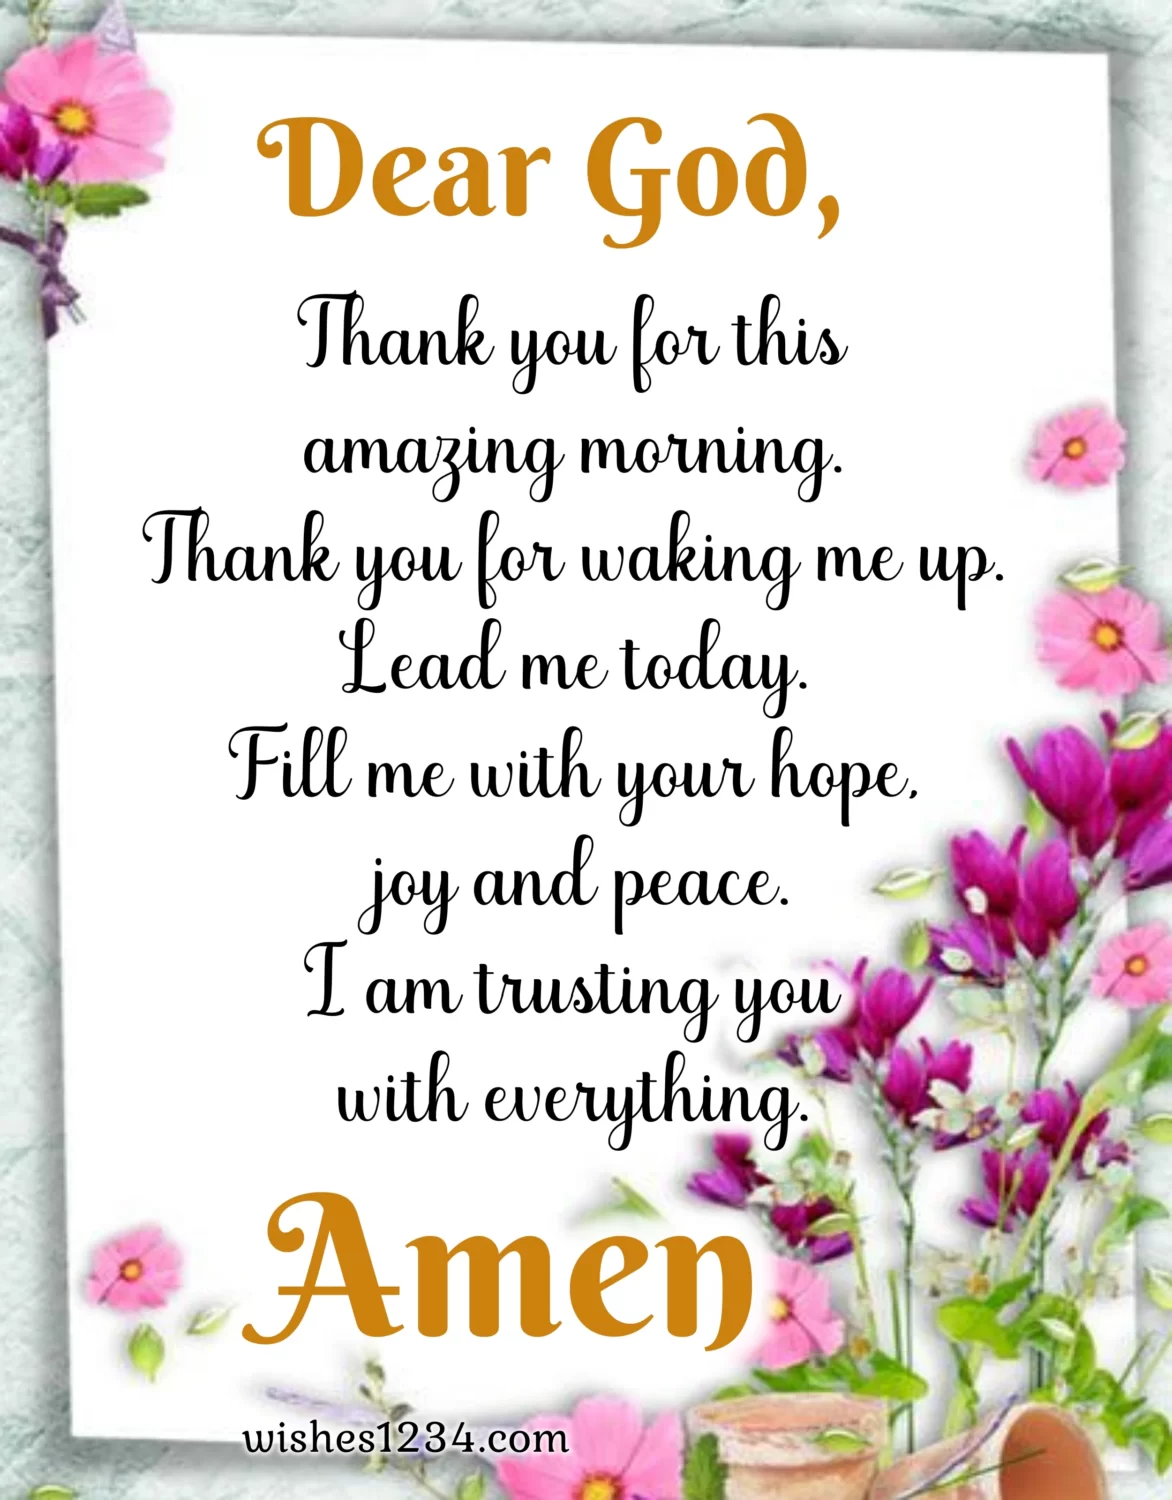 Morning prayer with purple flower border, Good morning quotes inspirational.